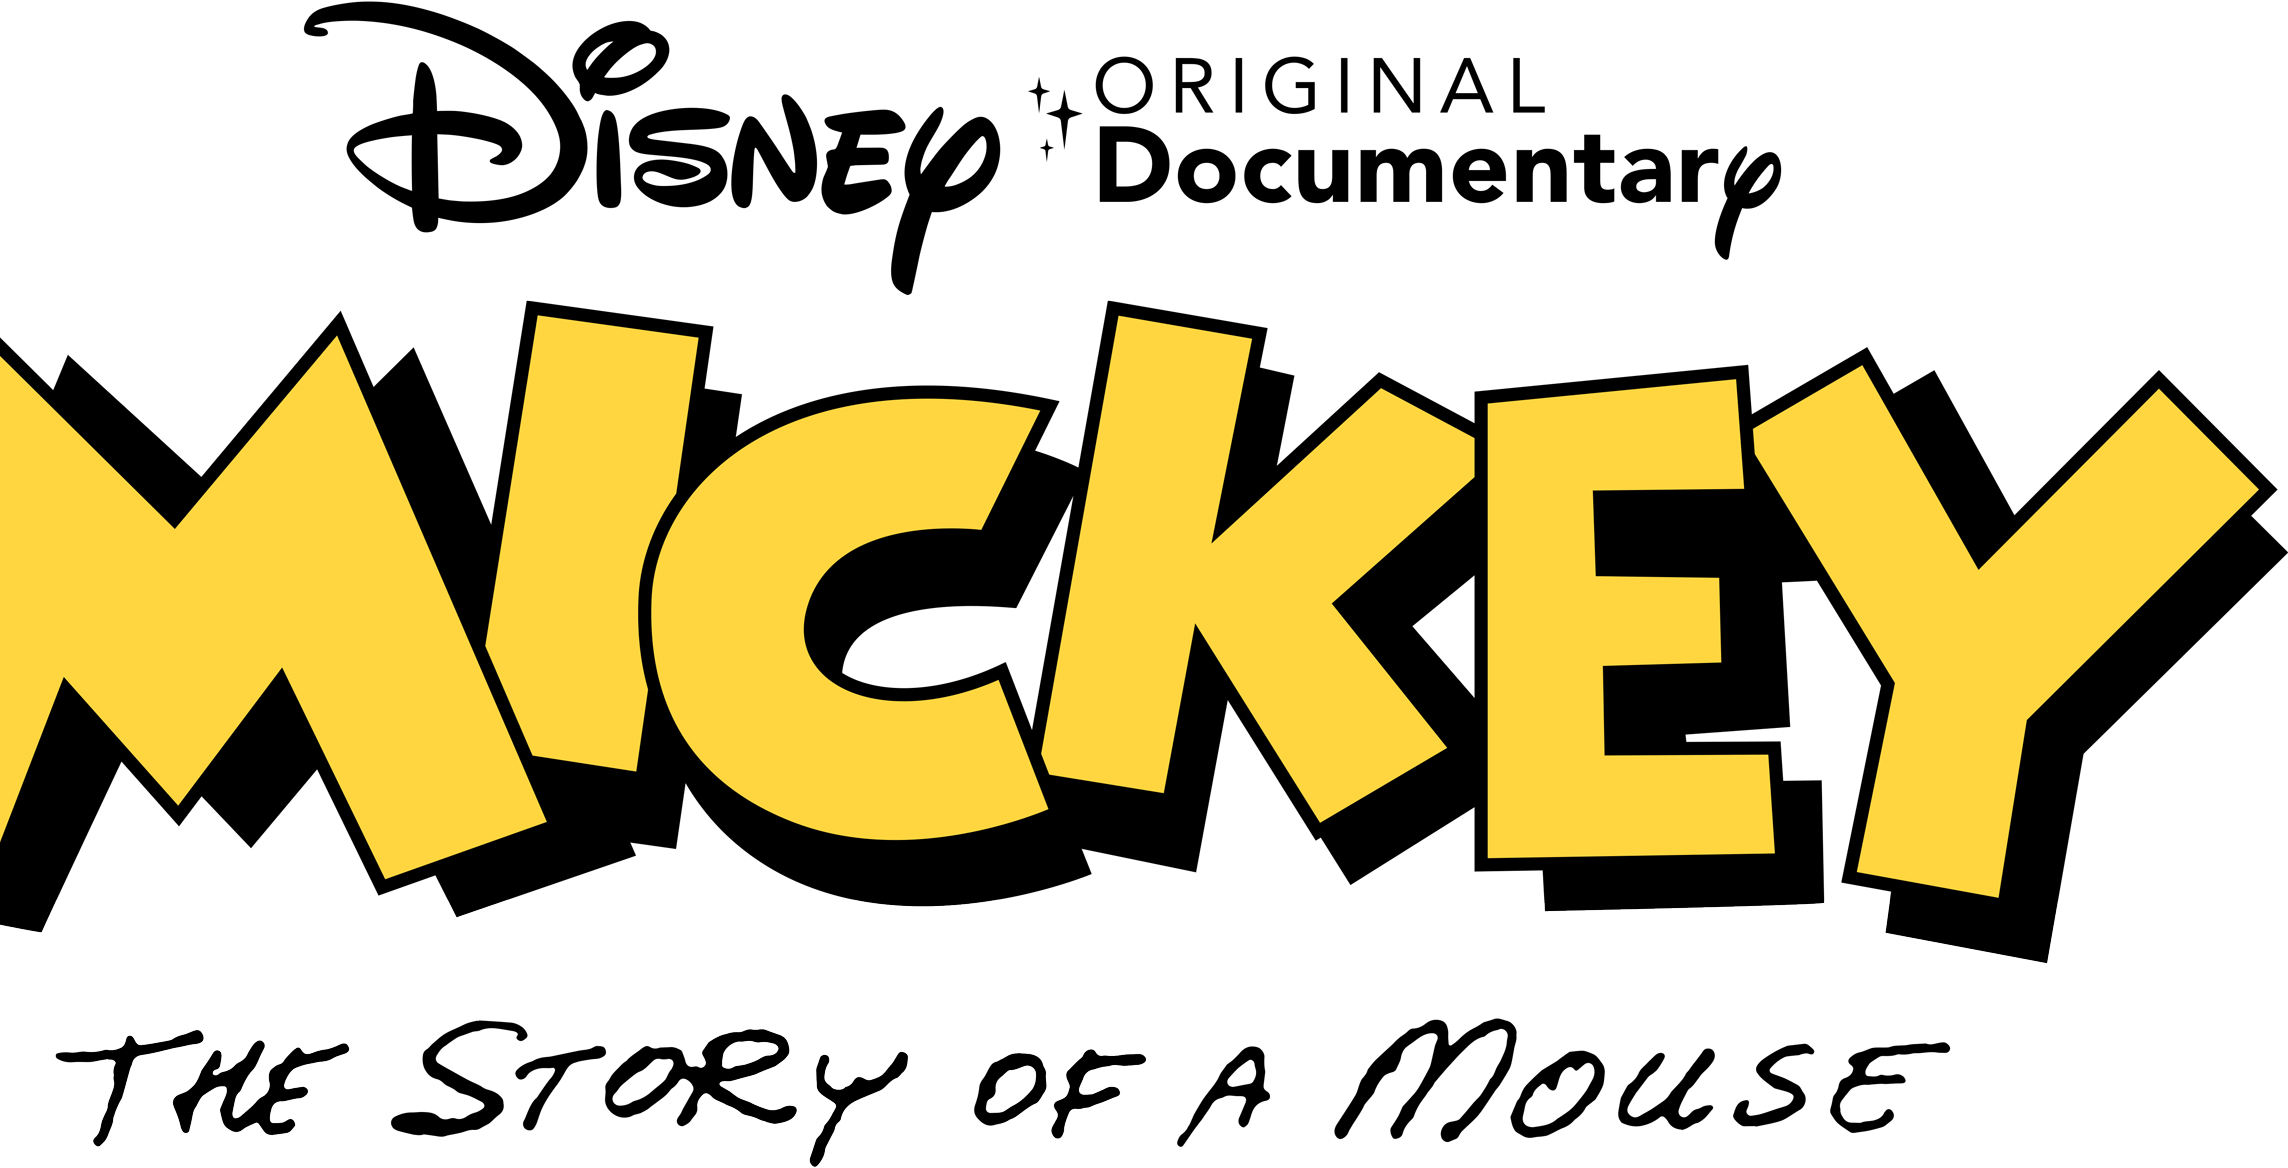 mickey mouse clubhouse logo png